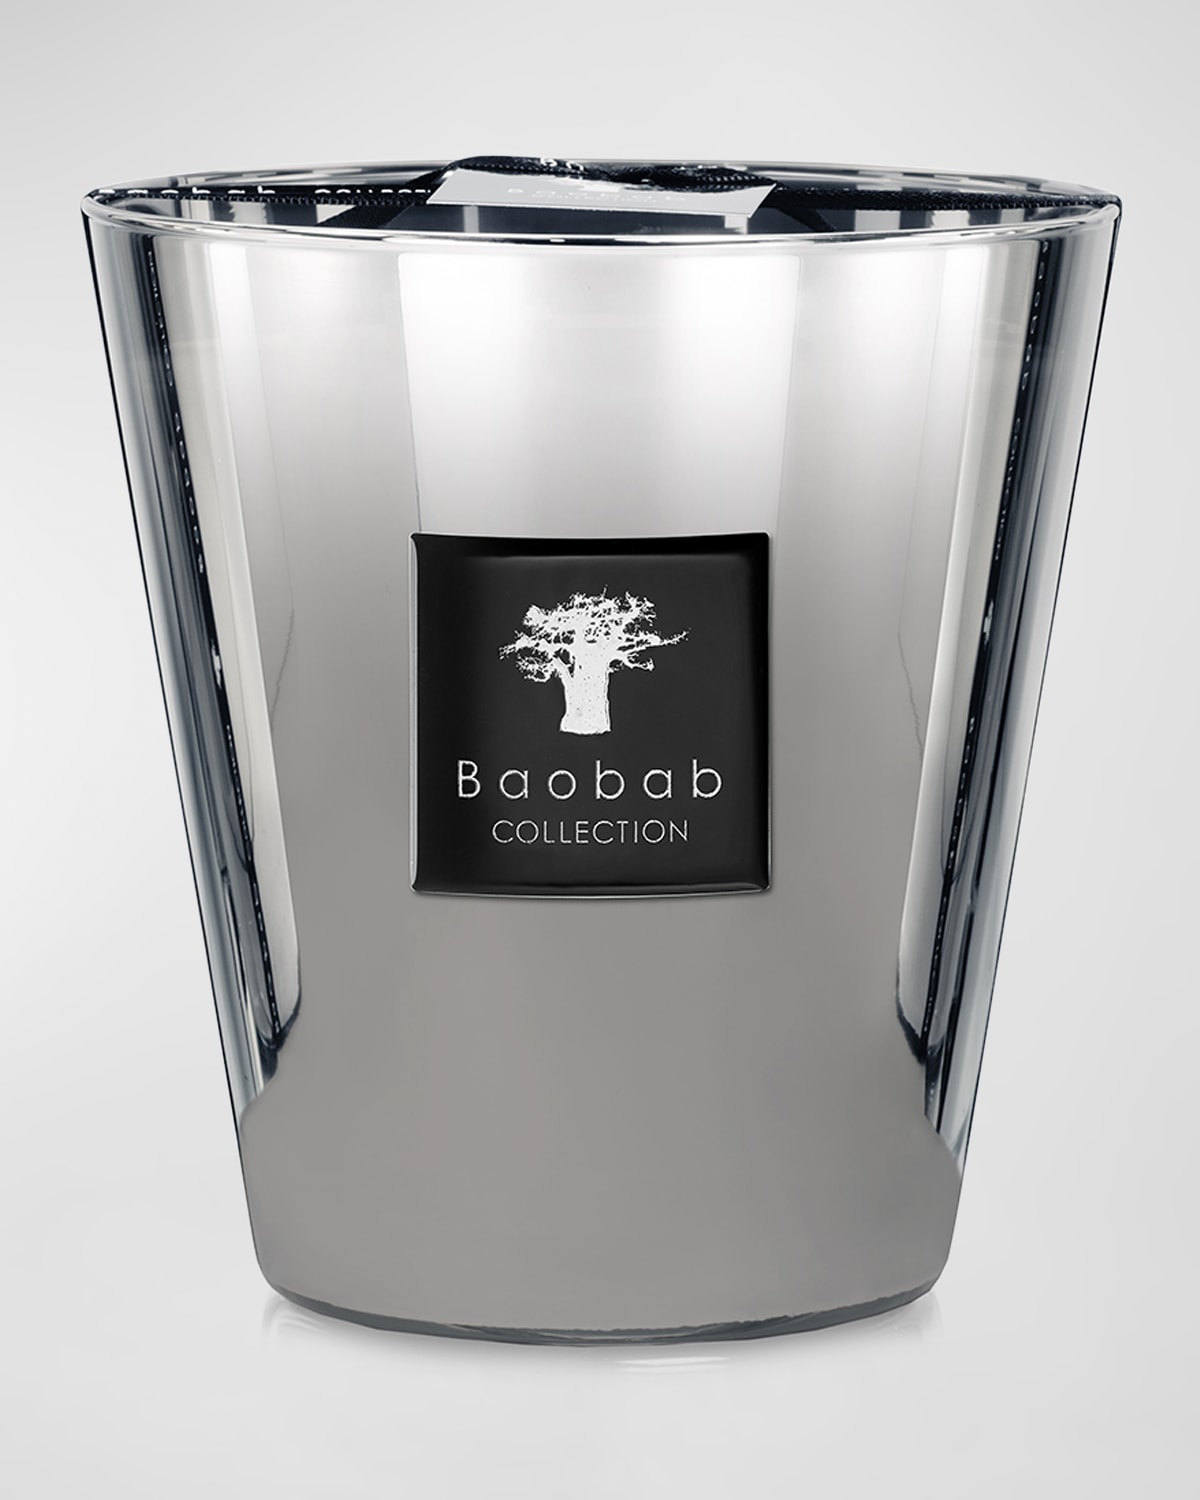 BAOBAB COLLECTION PLATINUM SCENTED CANDLE, 6.3"